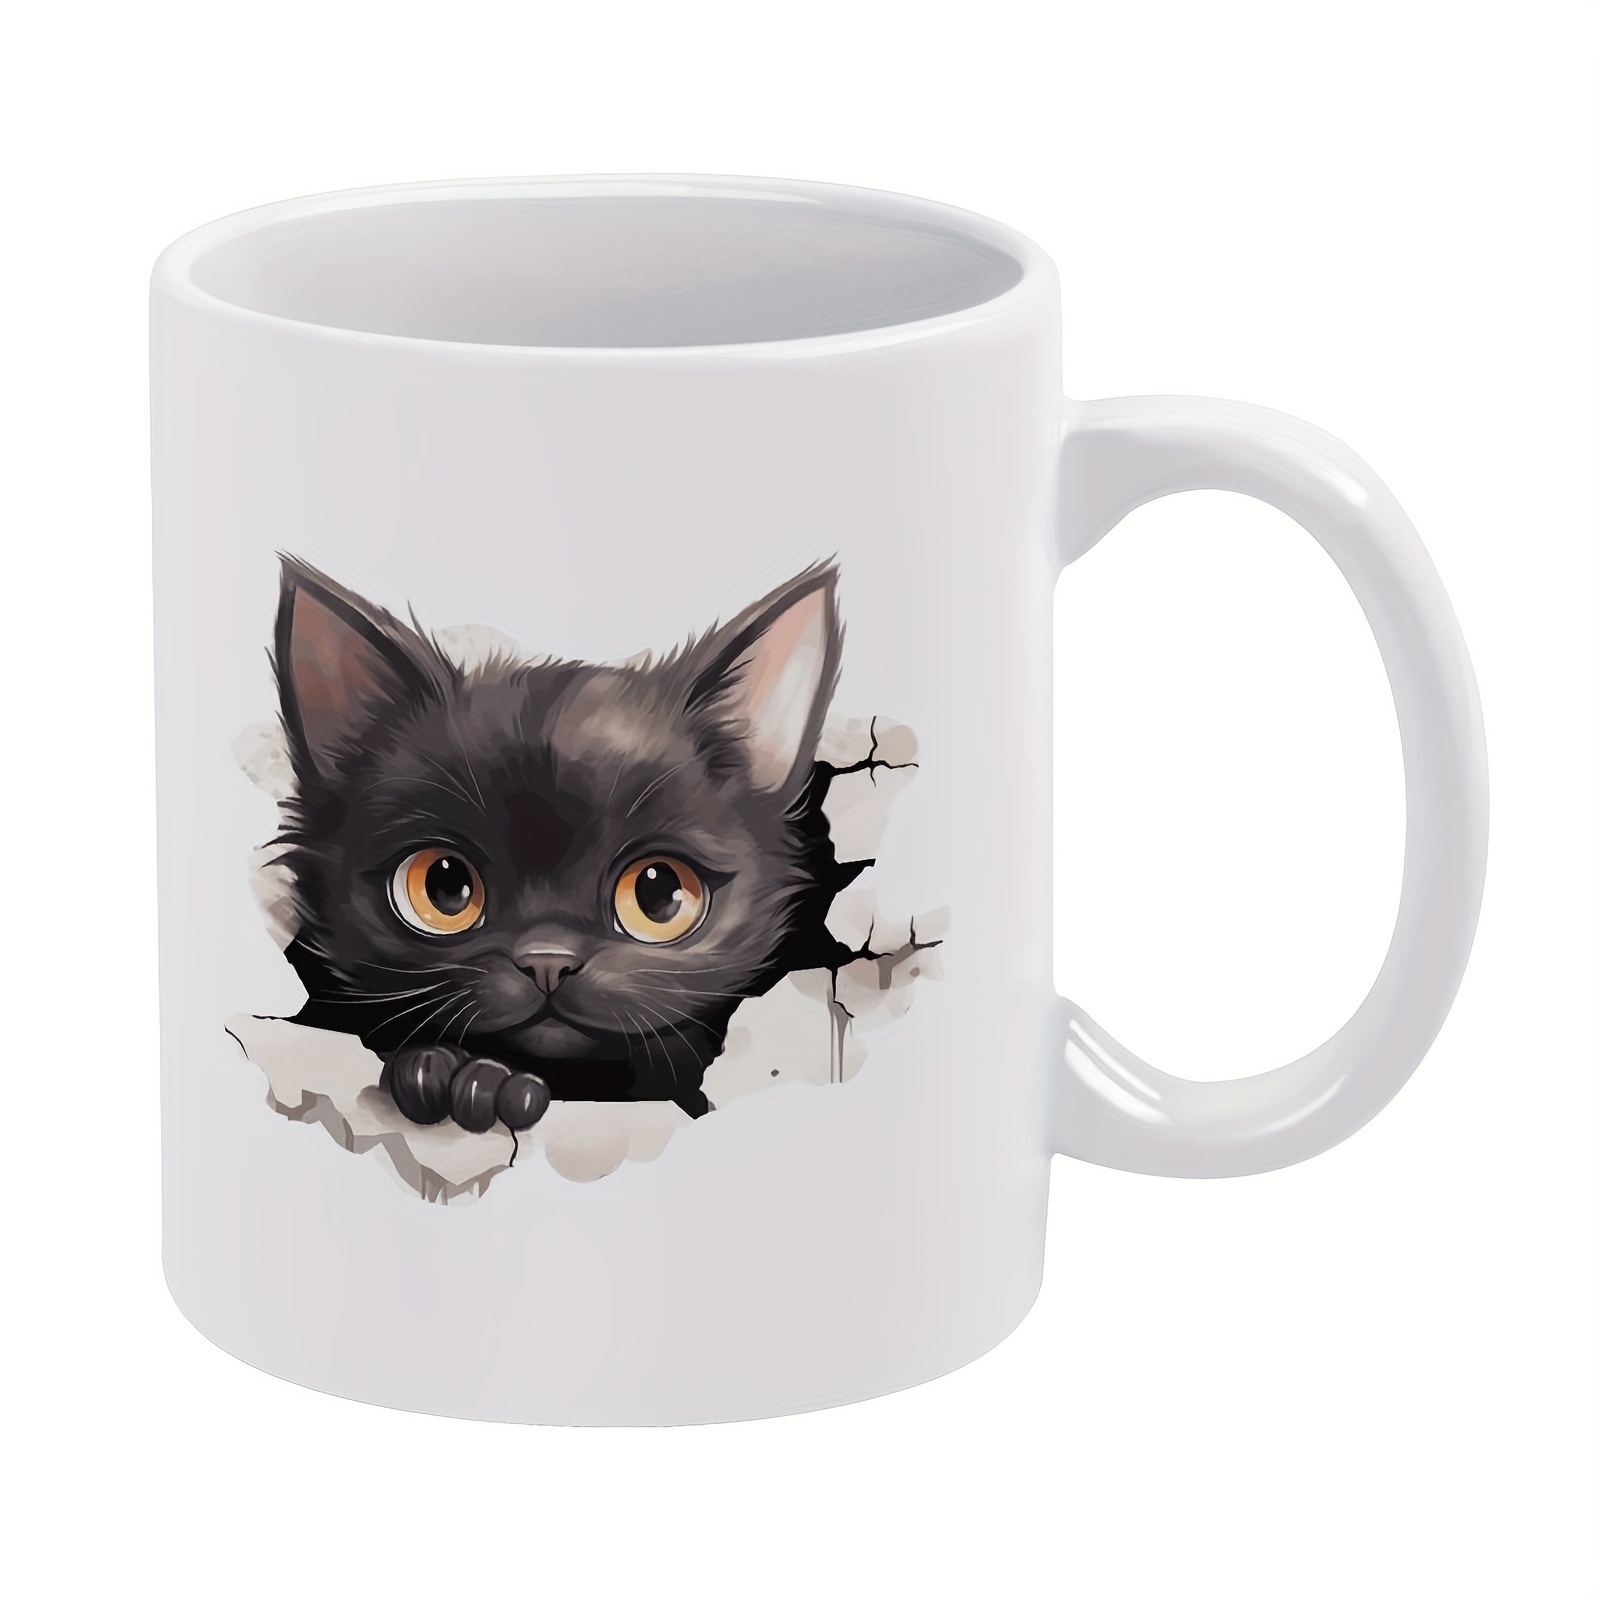 Cute Ceramic Cat Mugs With Lids Or Coaster, Novelty Lovely Kitty